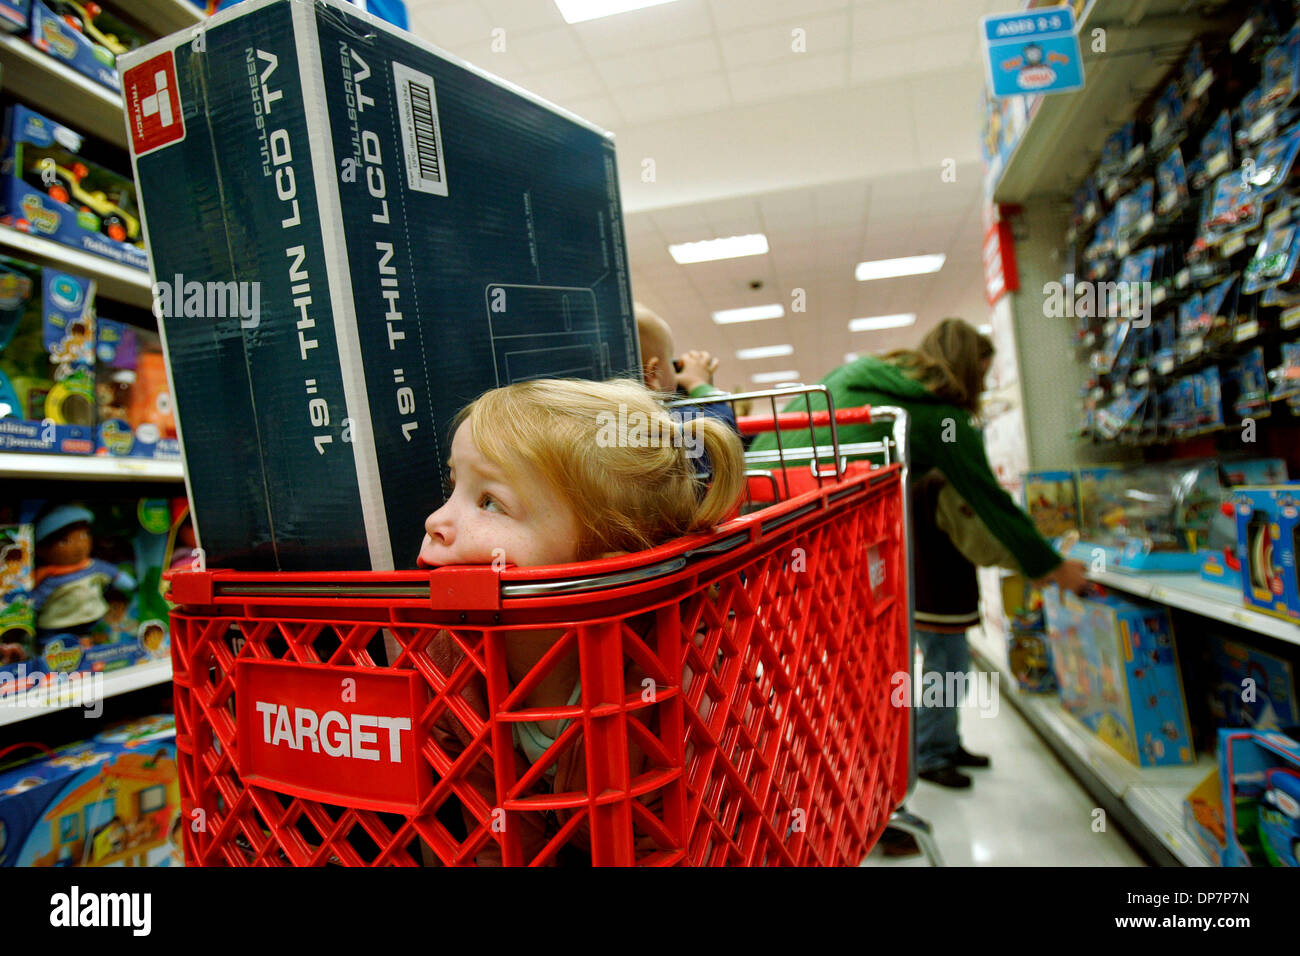 Nov 22, 2006; Encinitas, CA, USA; MOLLIE SOWARDS, age 3, sinks into a corner of her mother's Target shopping cart at 6:31 a.m., as her mother, MICHELE SOWARDS, age 32 of San Marcos, right, shows a toy to her 6-year-old son, SAM.  Early risers shop at Target Greatland store in Encinitas Friday, the day after Thanksgiving.  Many lined up for deep discounts on certain items that were  Stock Photo